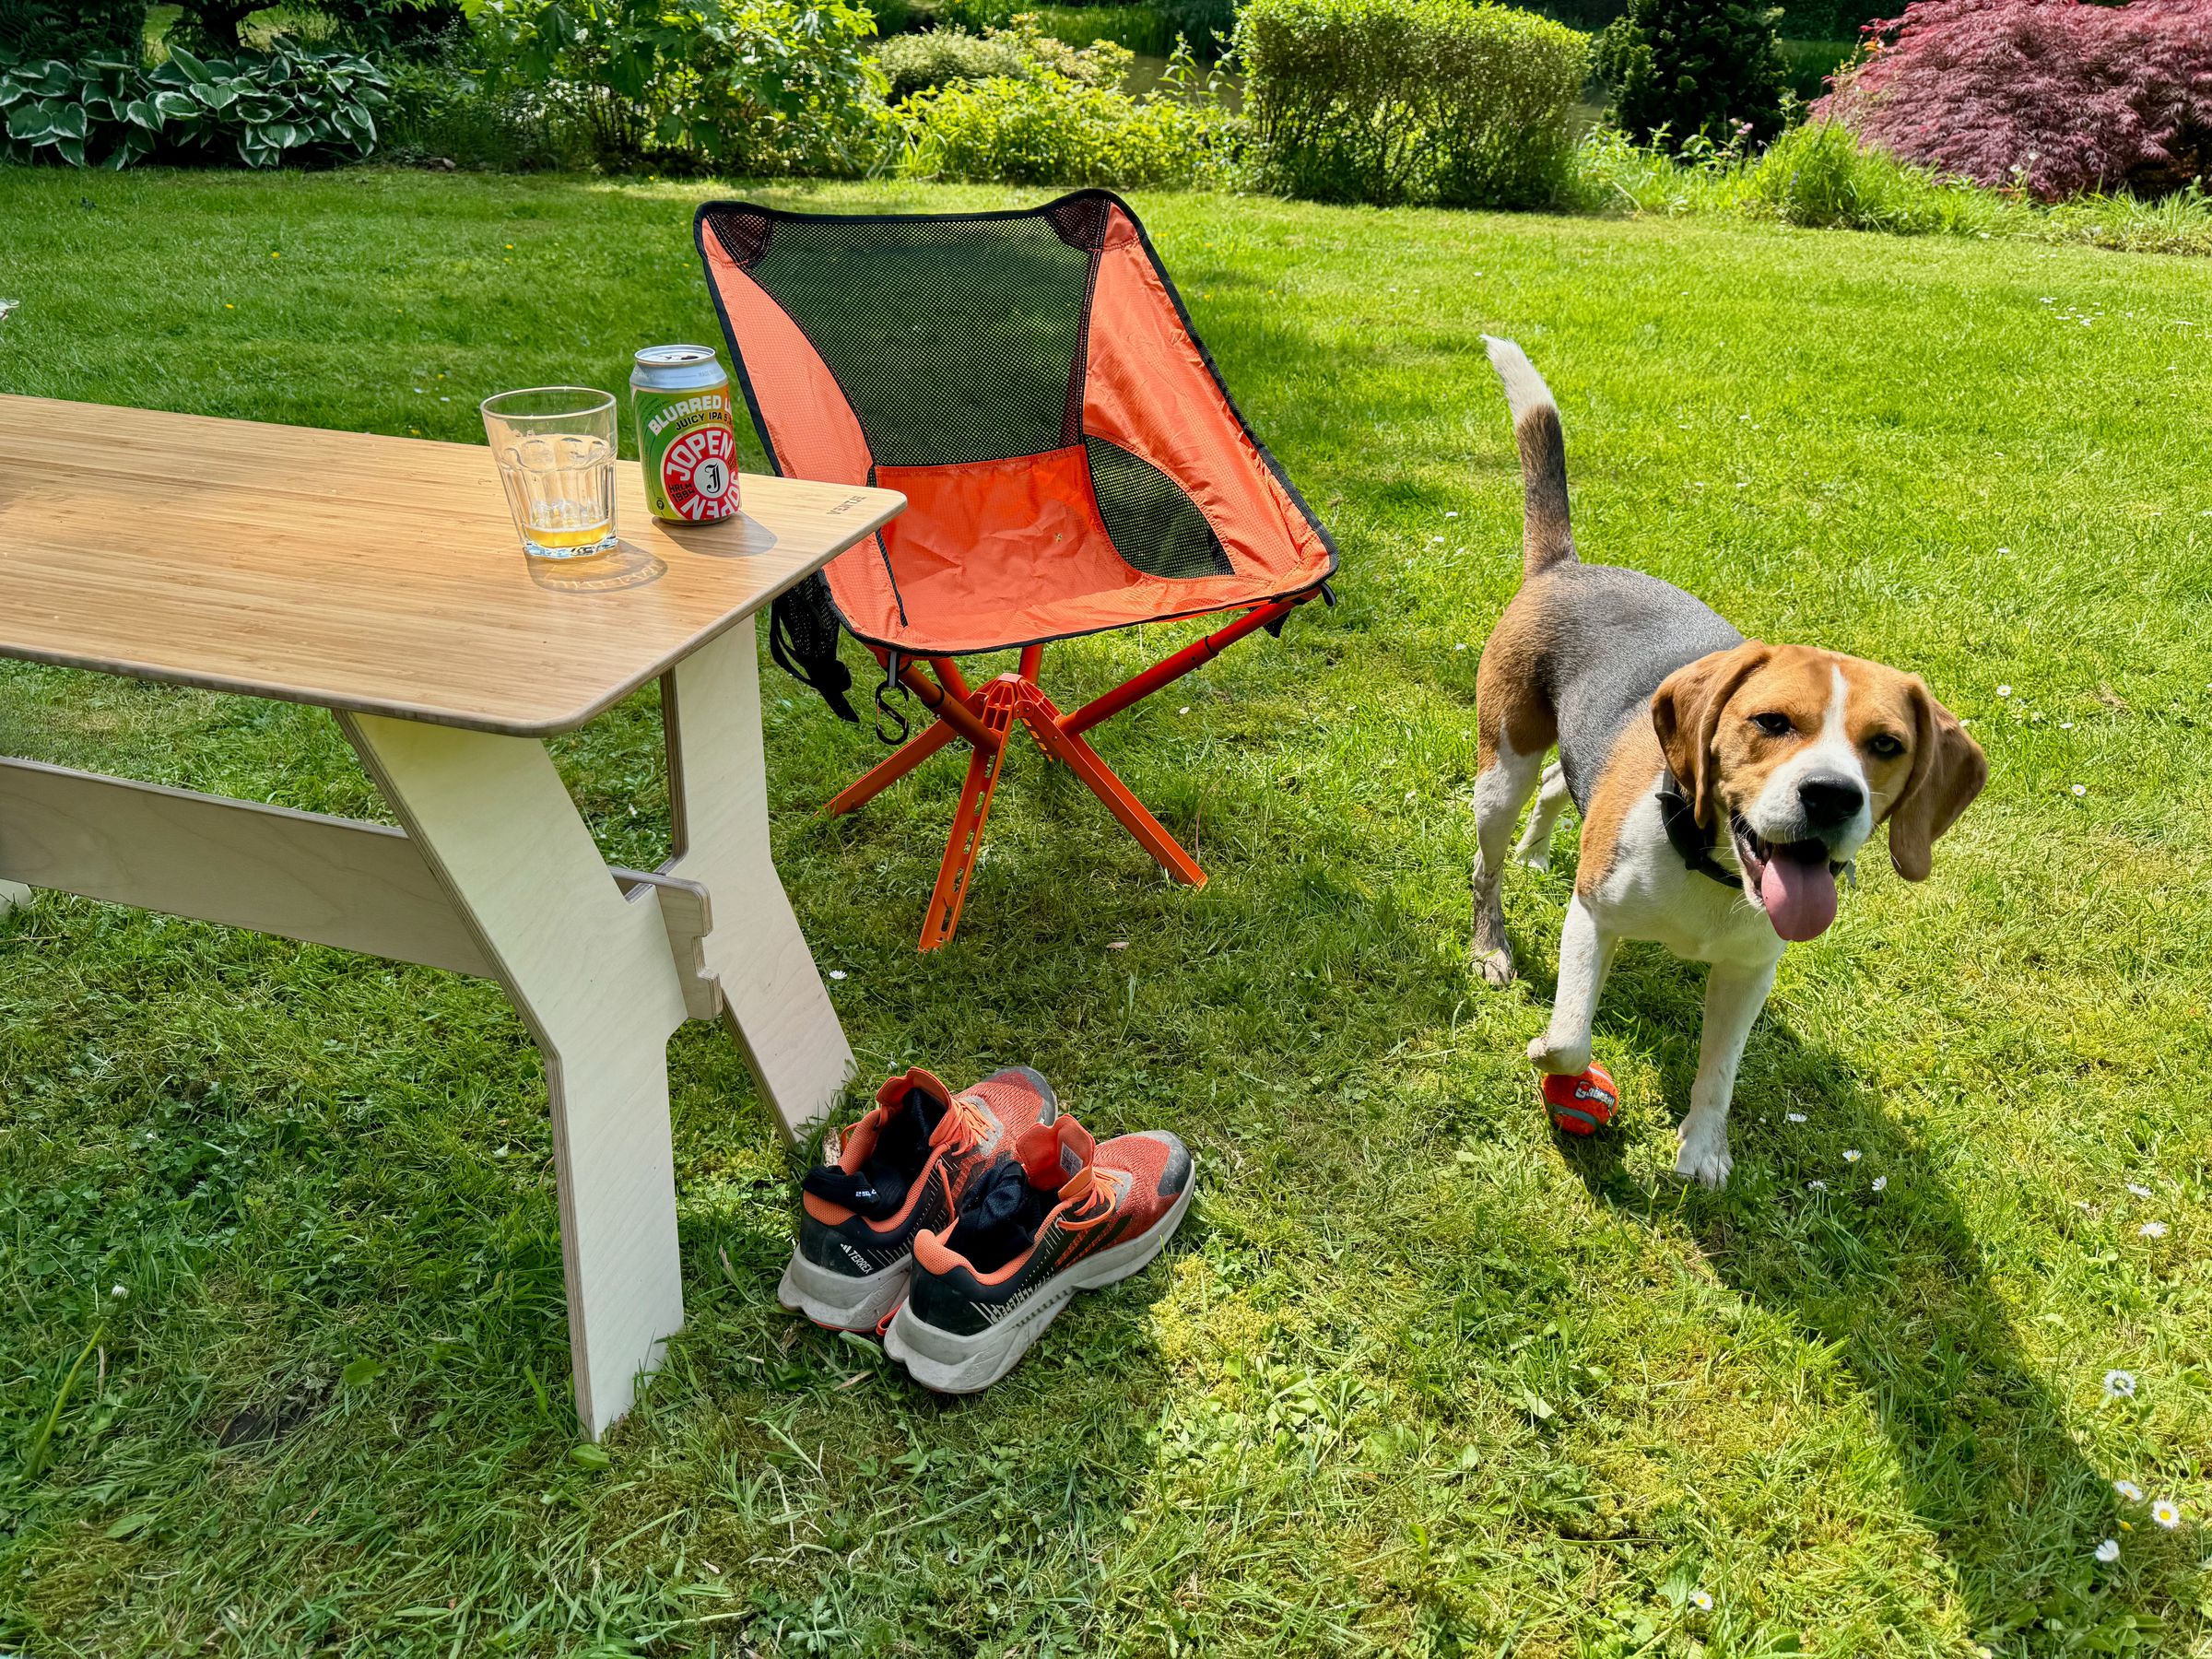 The Sitpack Campster 2 chair on grass near a table that’s next to a pair of shoes and a dog that wants you to throw his ball.